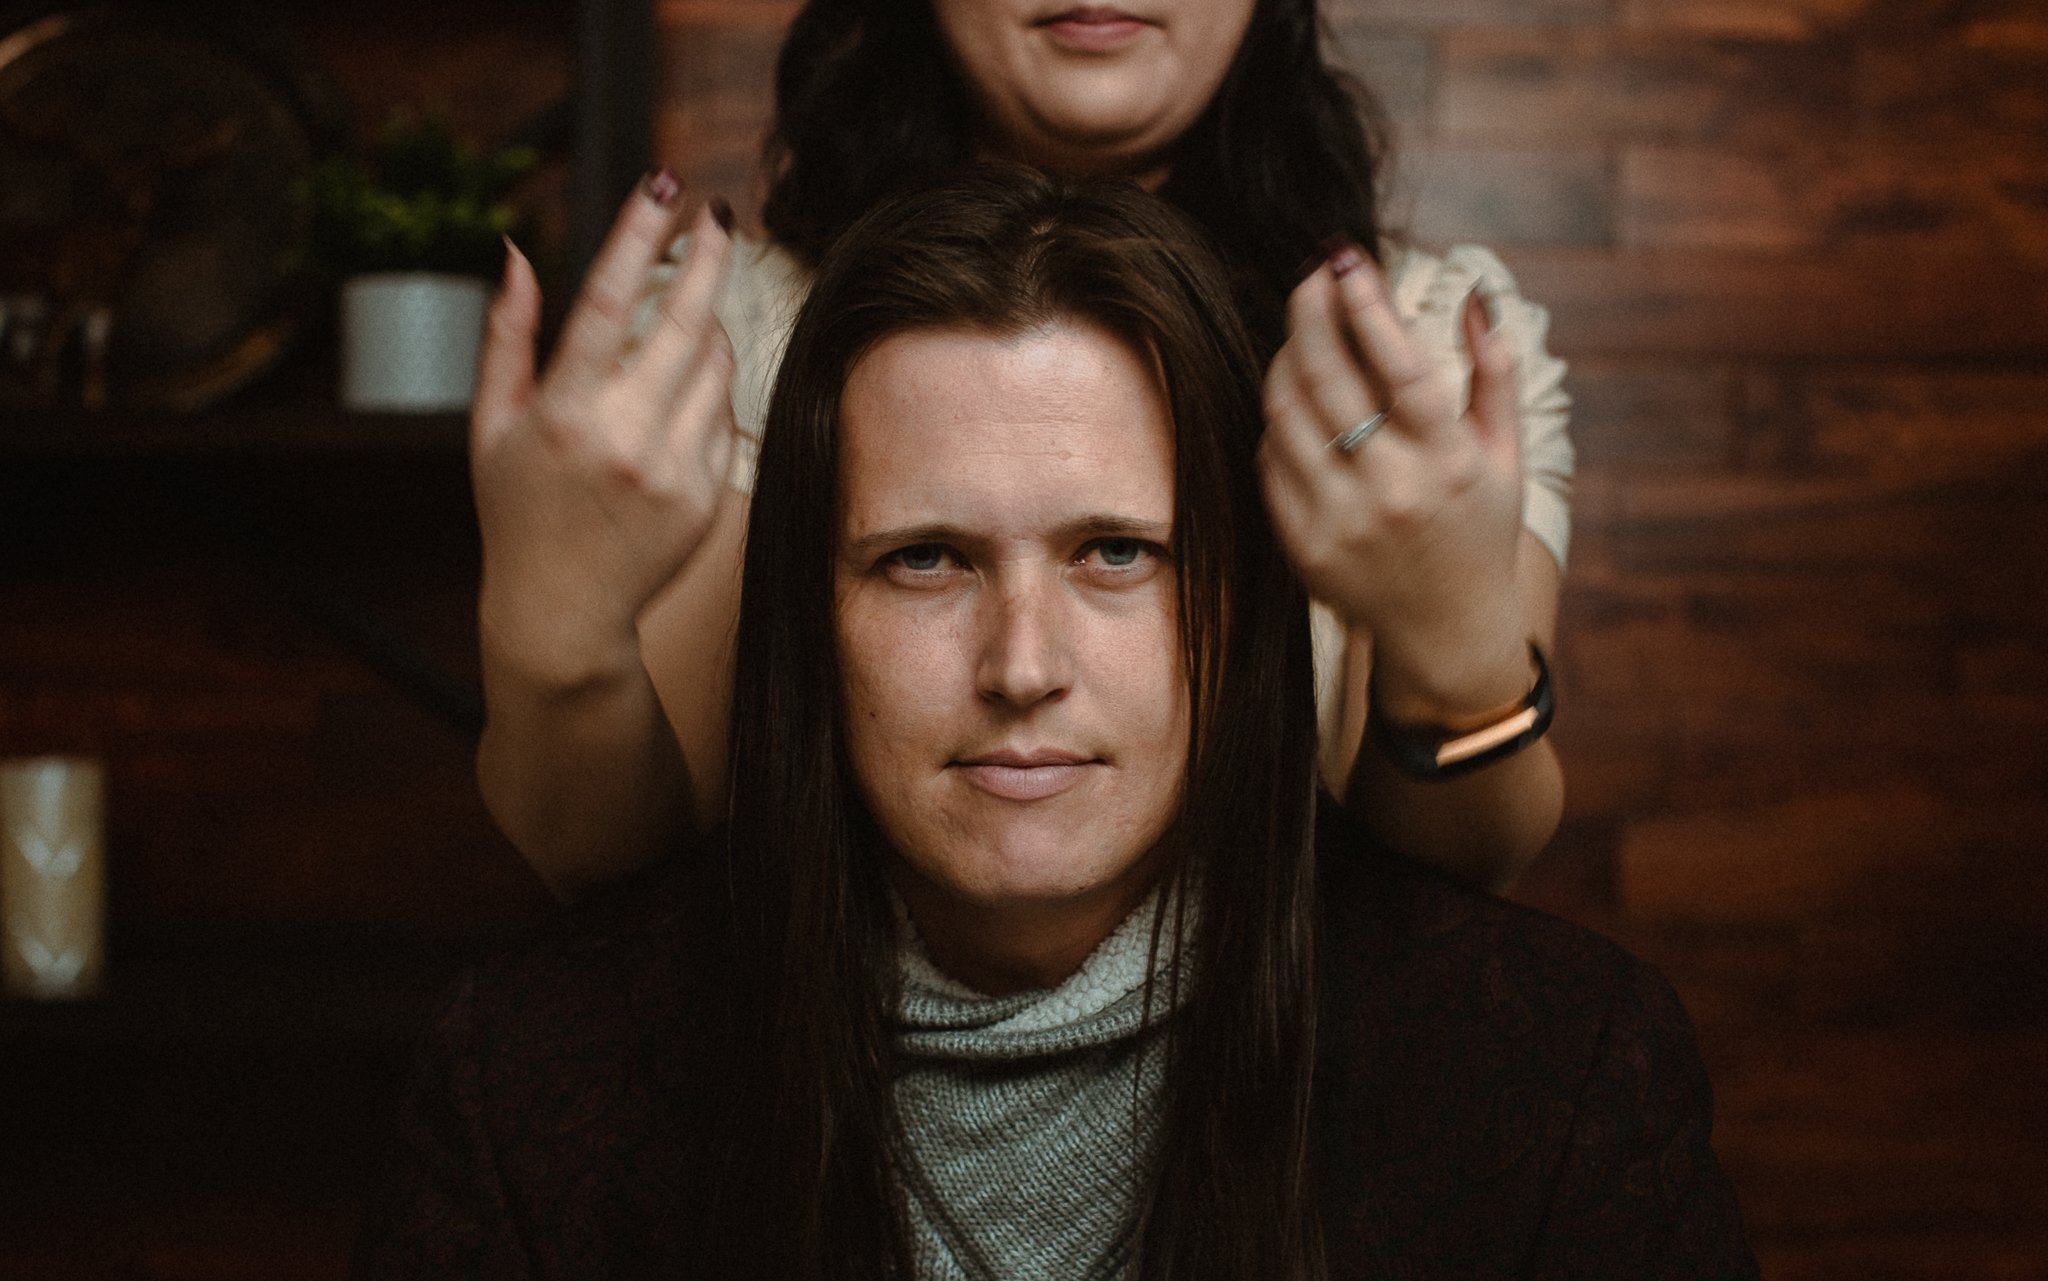 Man looks at camera while girlfriend touches his long hair